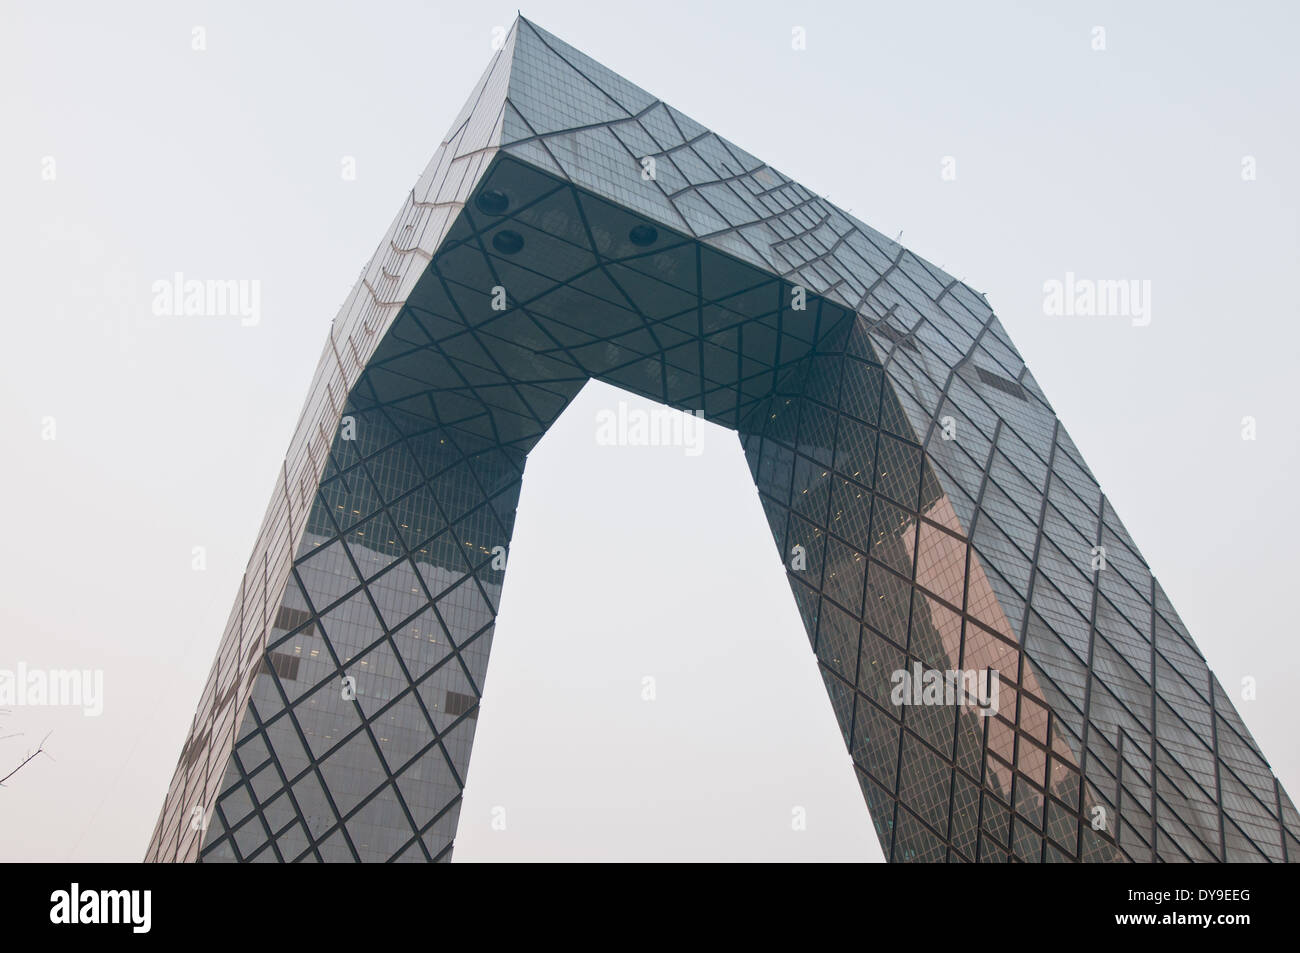 China Central Television (CCTV) Headquarters modern building on East Third Ring Road, Guanghua Road in Beijing Stock Photo